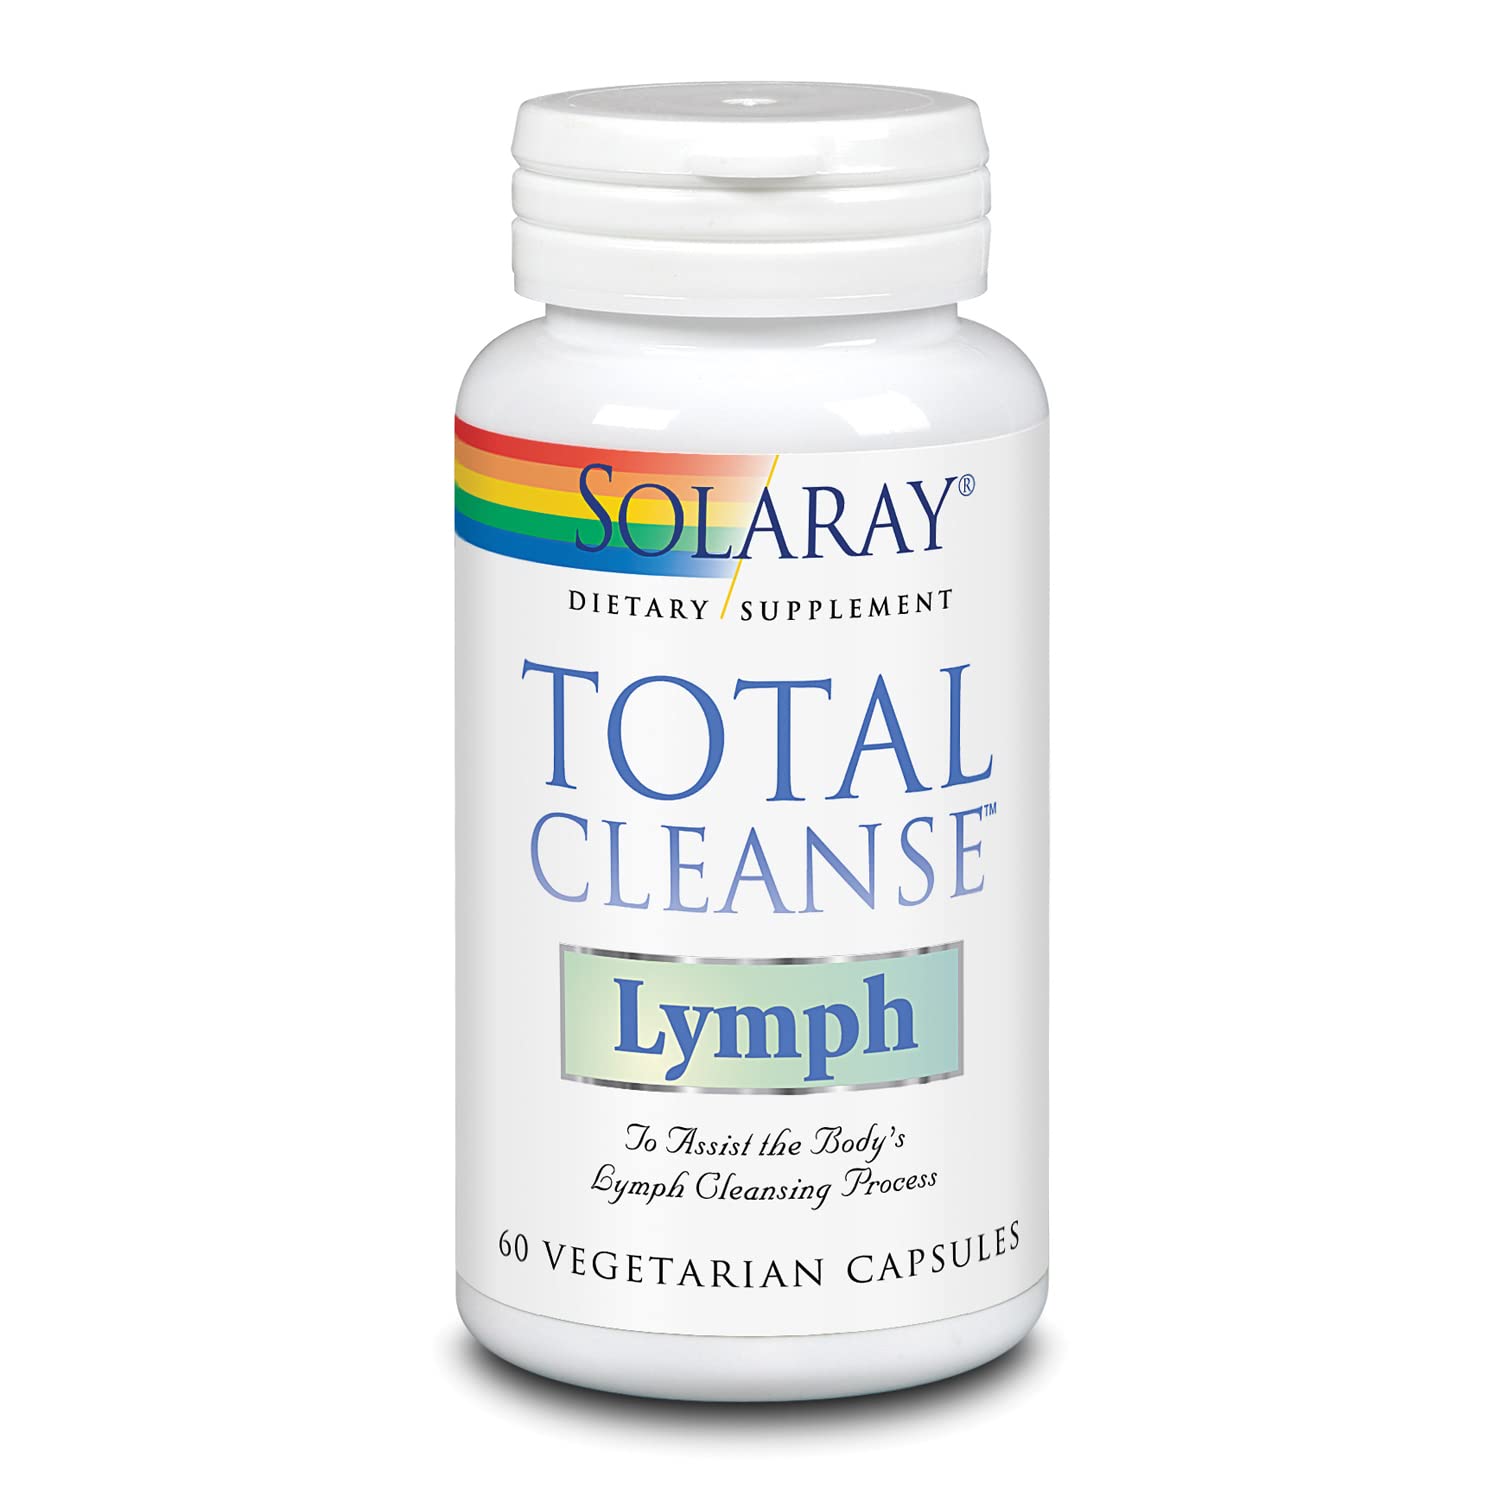 Solaray Total Cleanse Lymph VCapsules, 60 Count